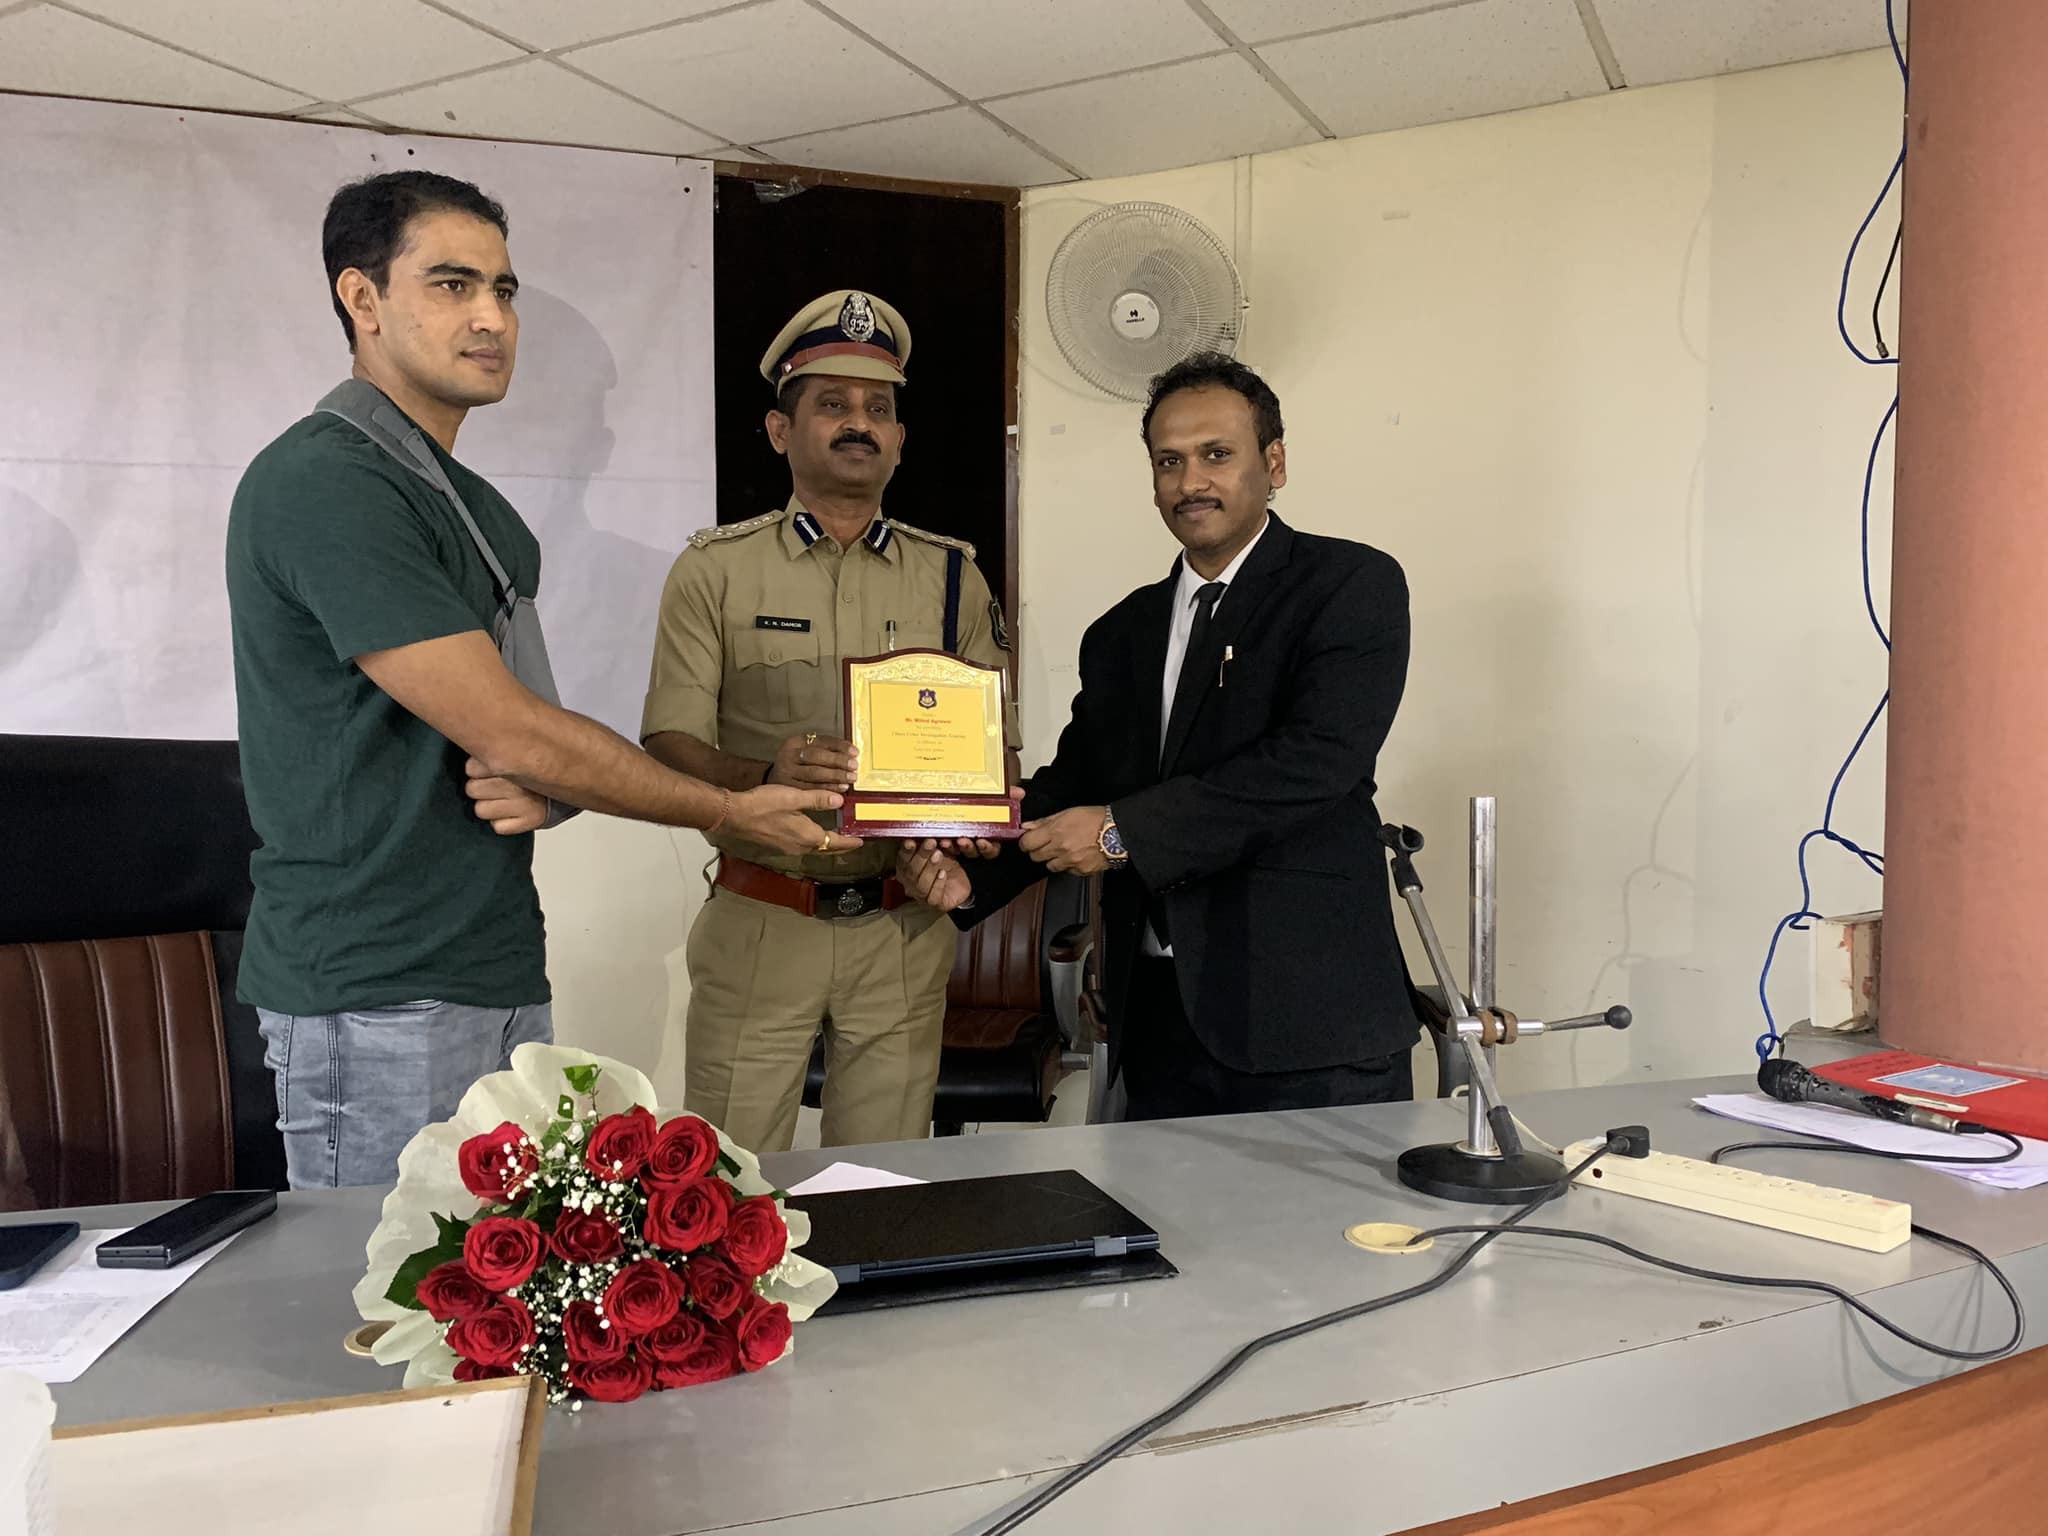 milind agarwal, ccas, aspl, avenging security pvt ltd, cyber crime  awareness society, cyber law, cyber investigation, cyber expert, advocate, Police officers